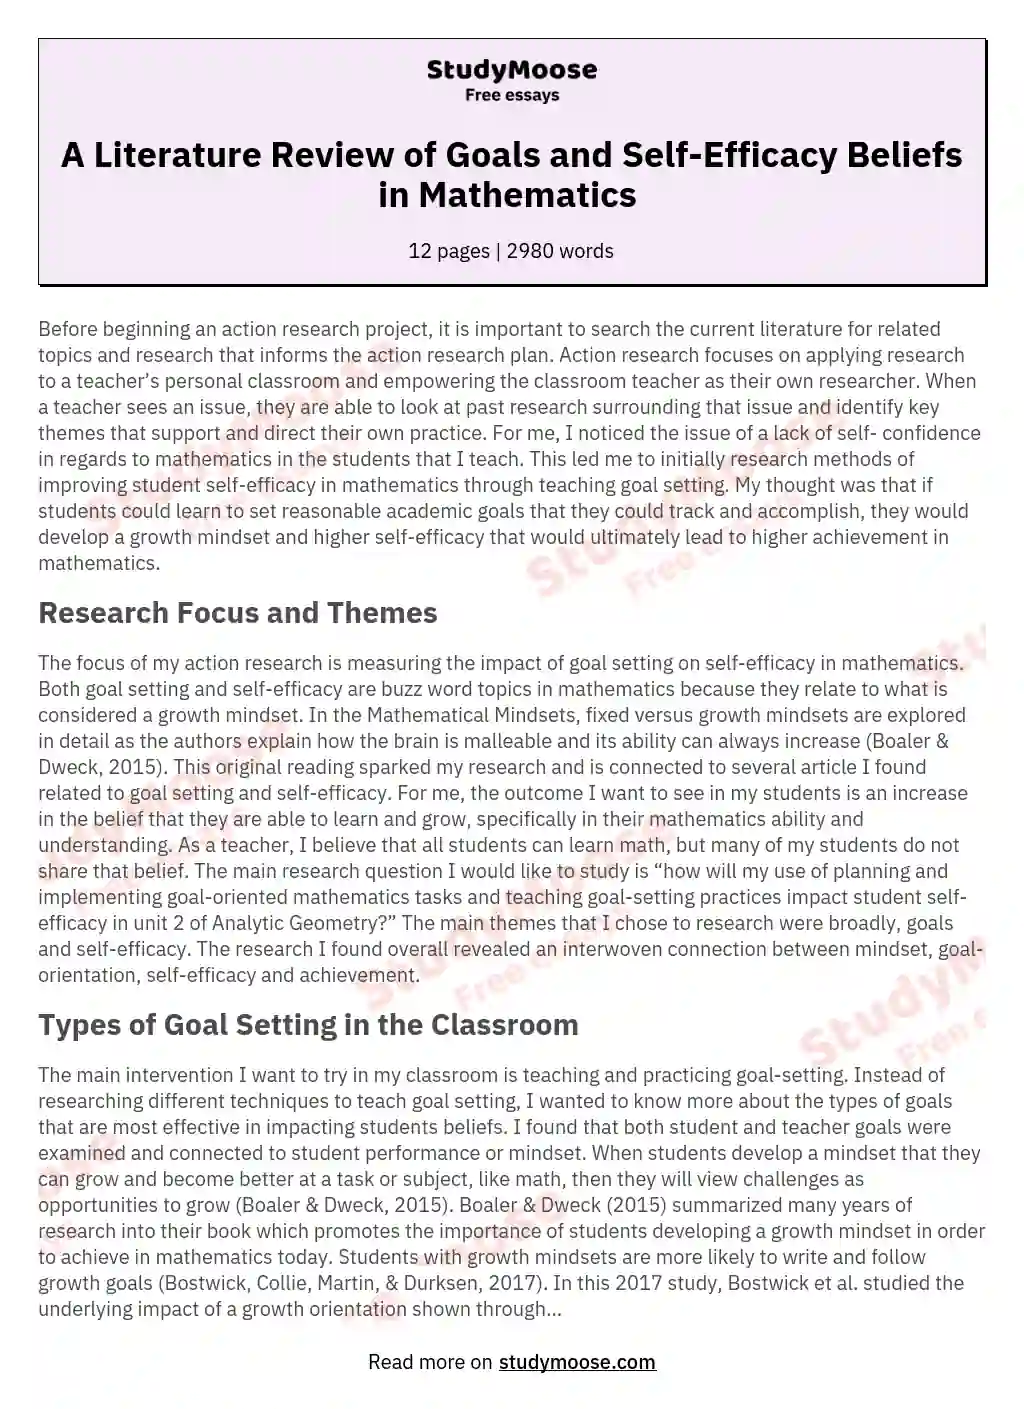 A Literature Review of Goals and Self-Efficacy Beliefs in Mathematics 